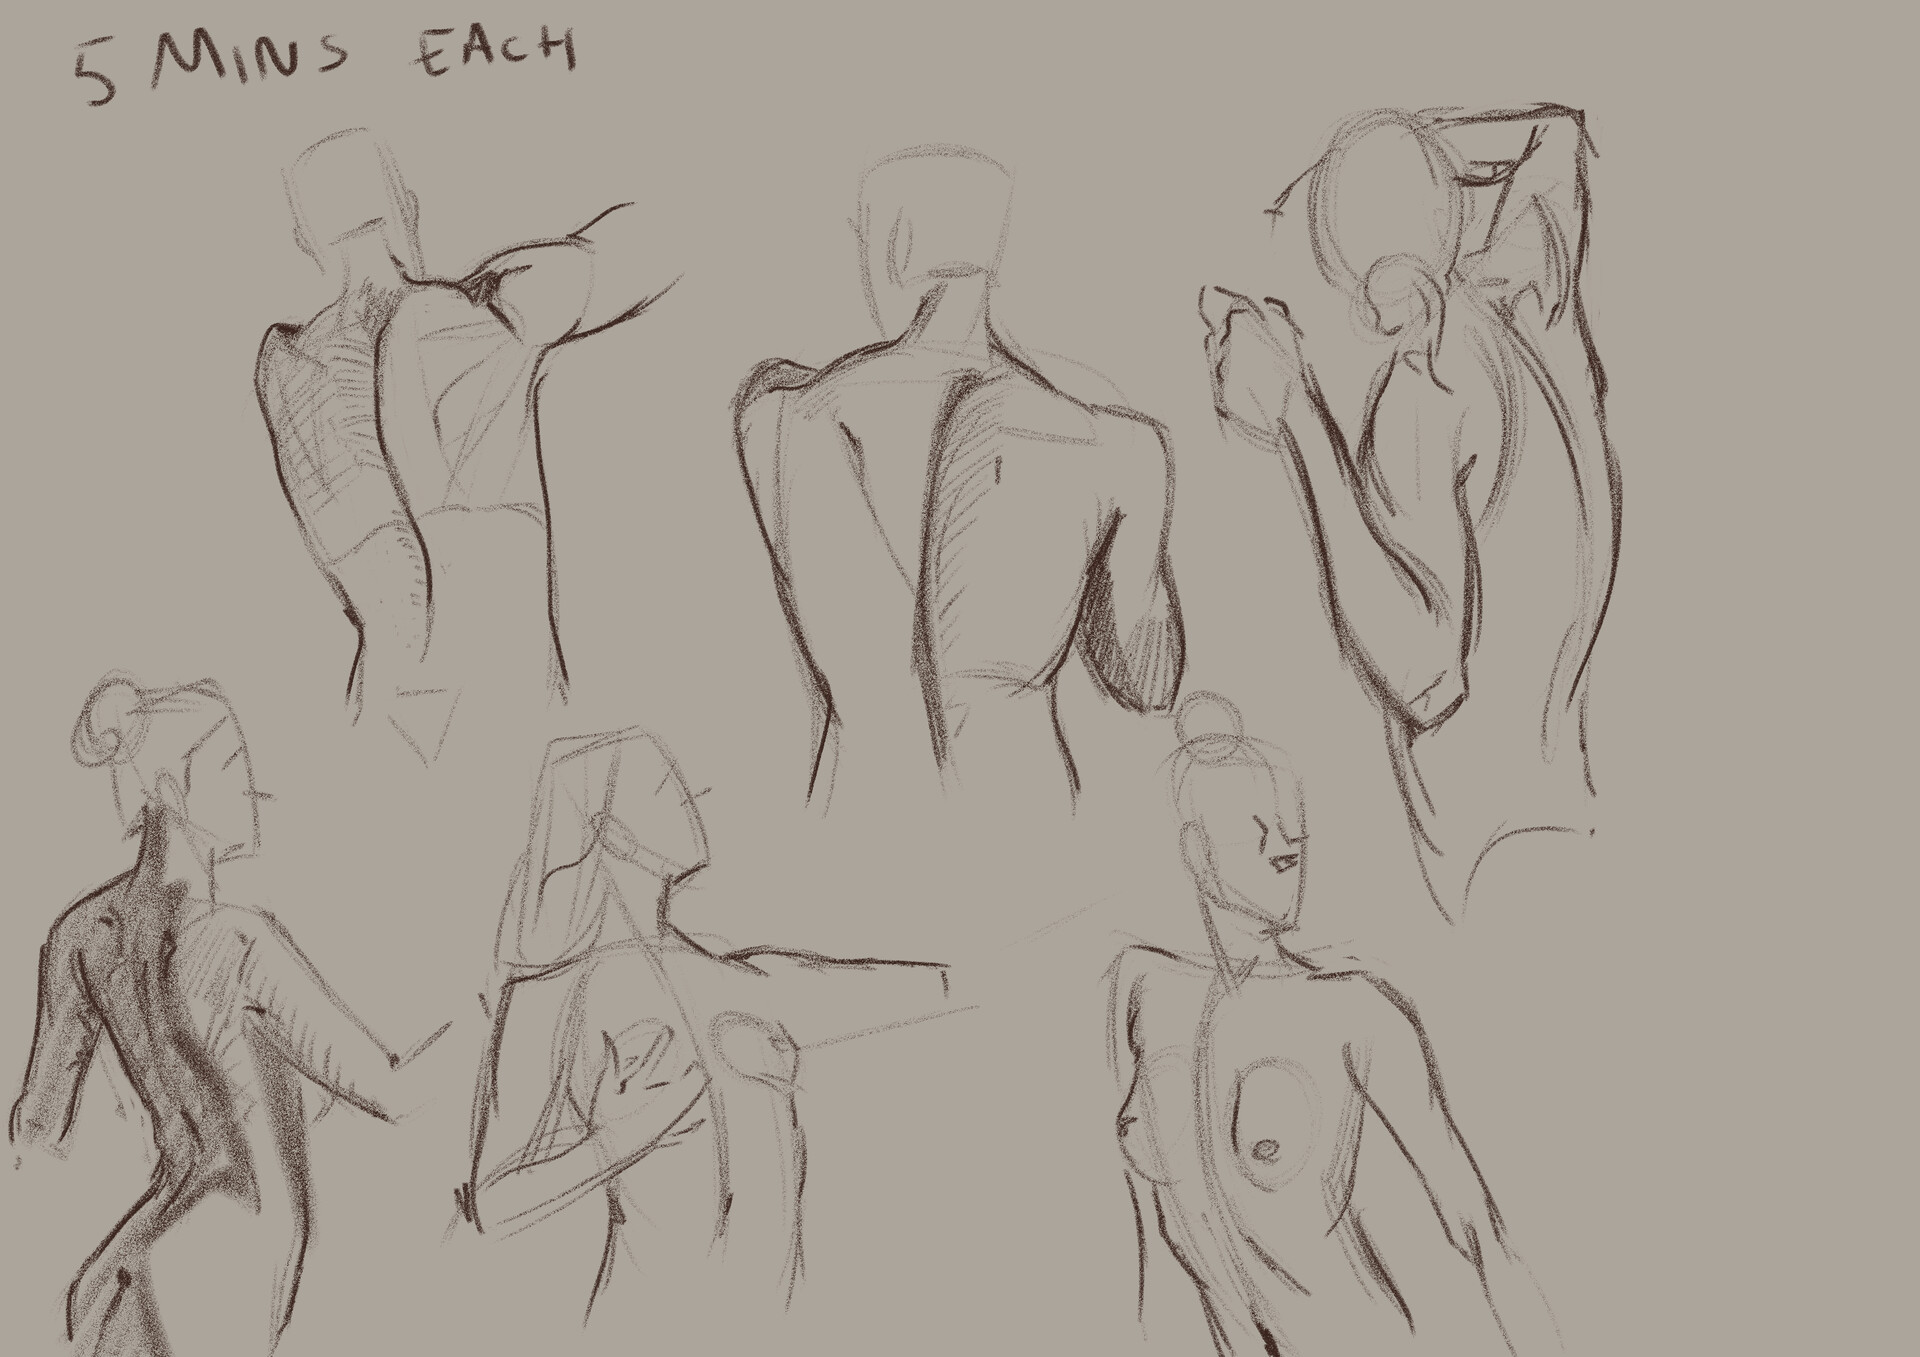 ArtStation - Some Life drawing sketches from the pocket sketchbook